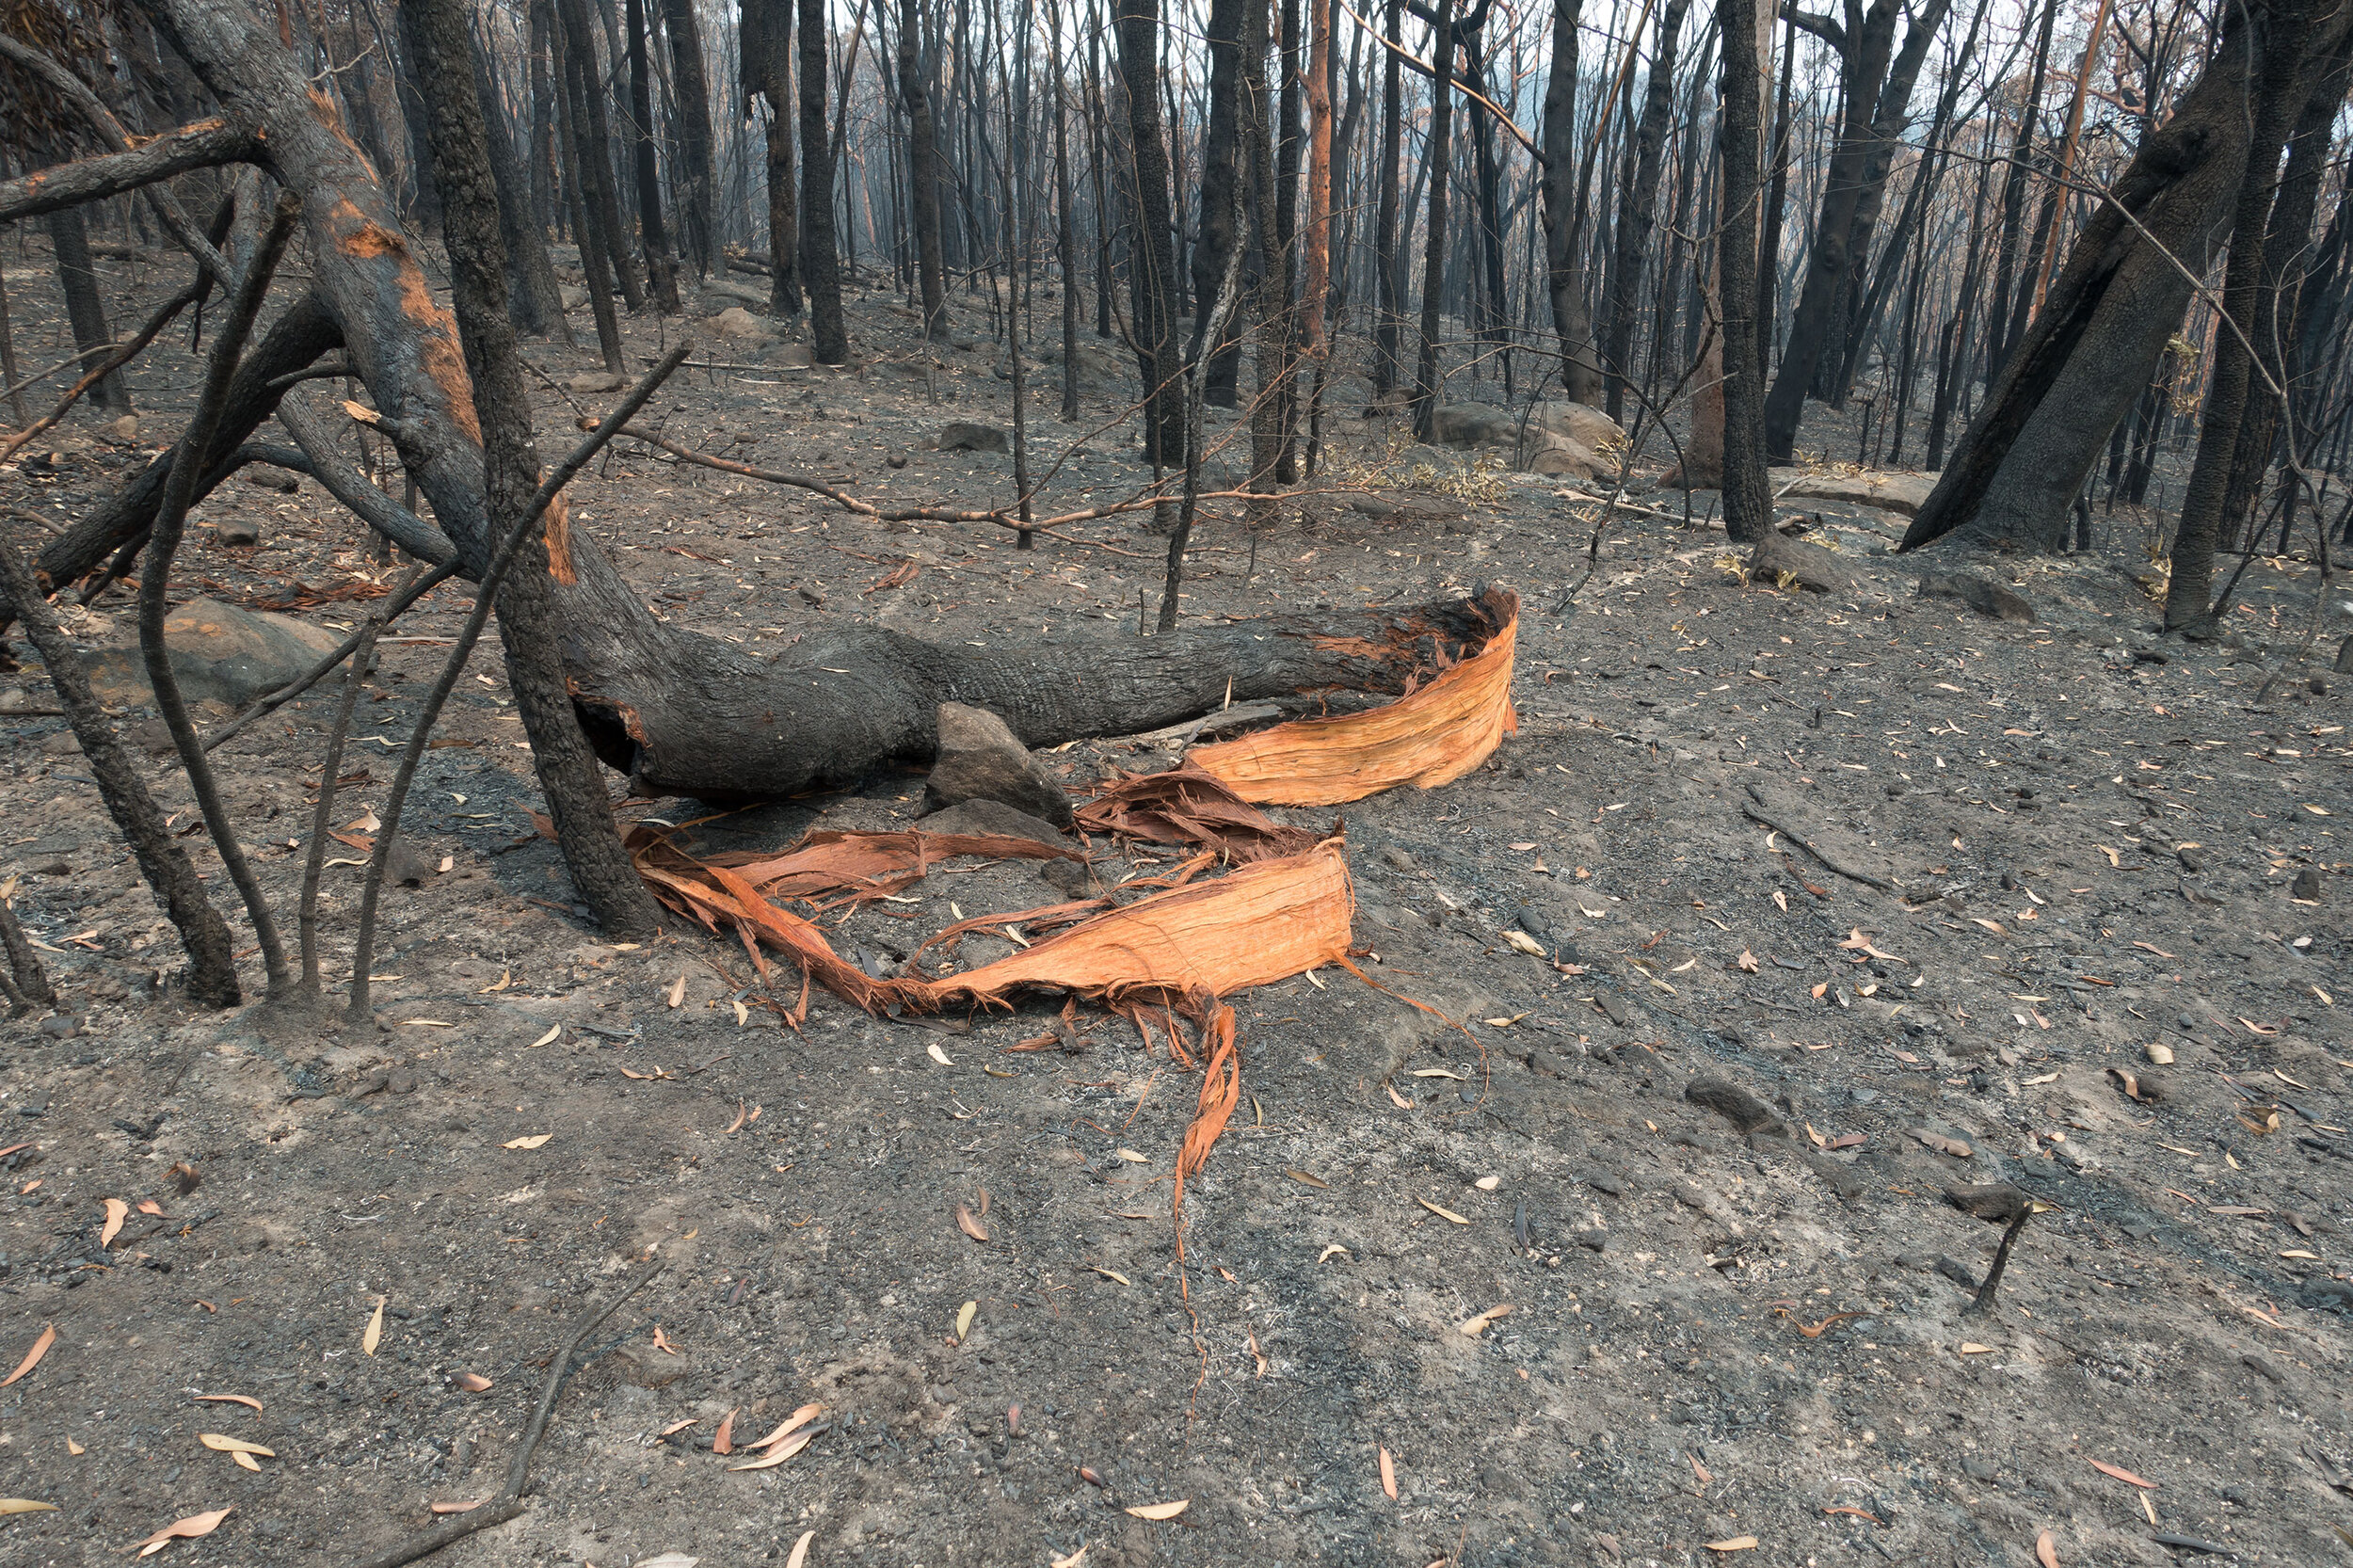 Mon 30 Dec 2020, entire forests scorched, ripped and ravaged.